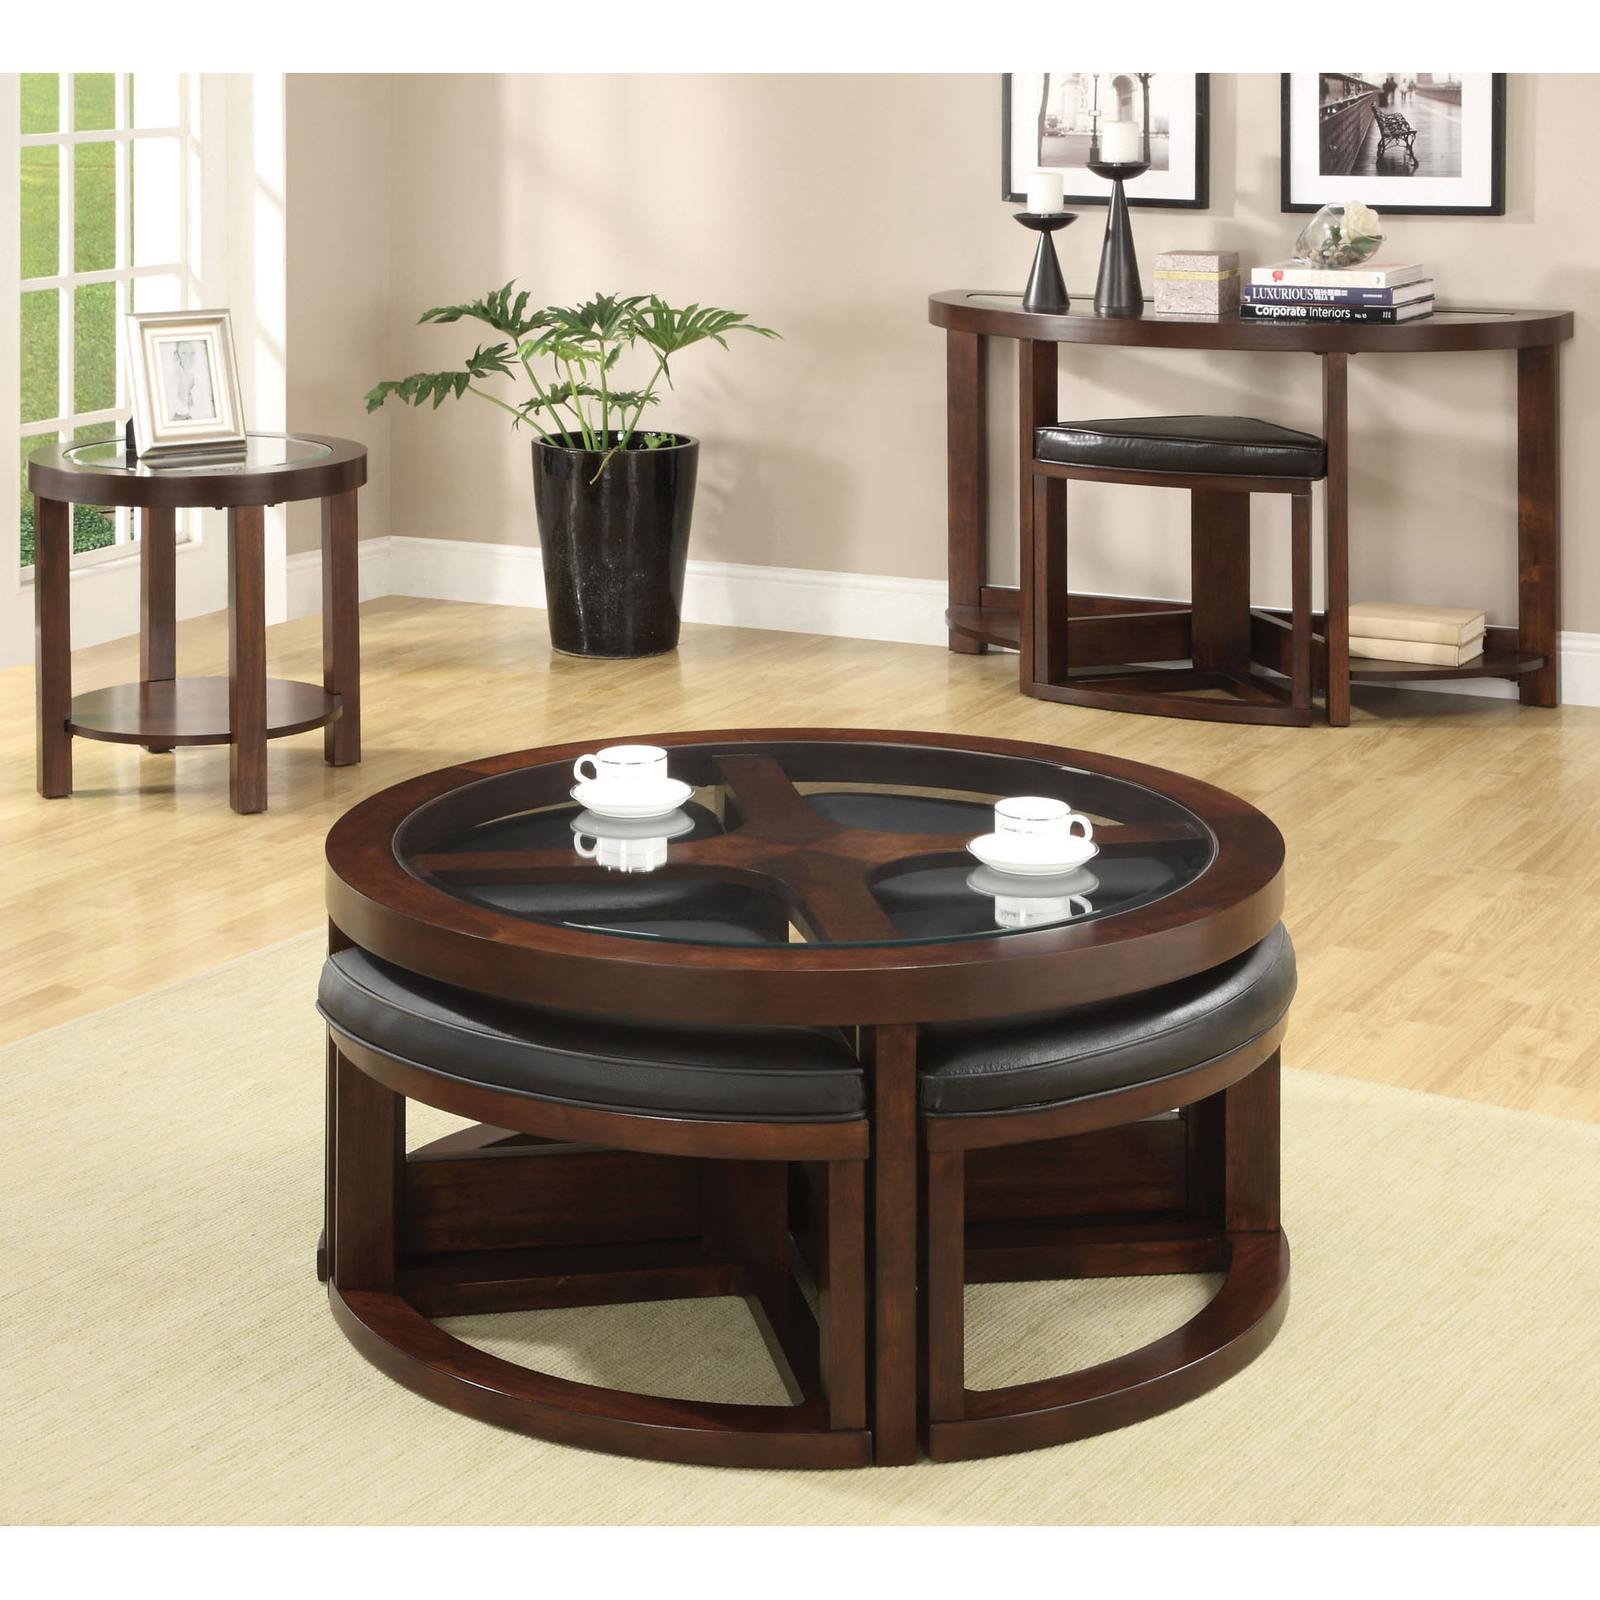 Coffee Table Ottoman Set Seating Glass Chairs Wood Round - Other